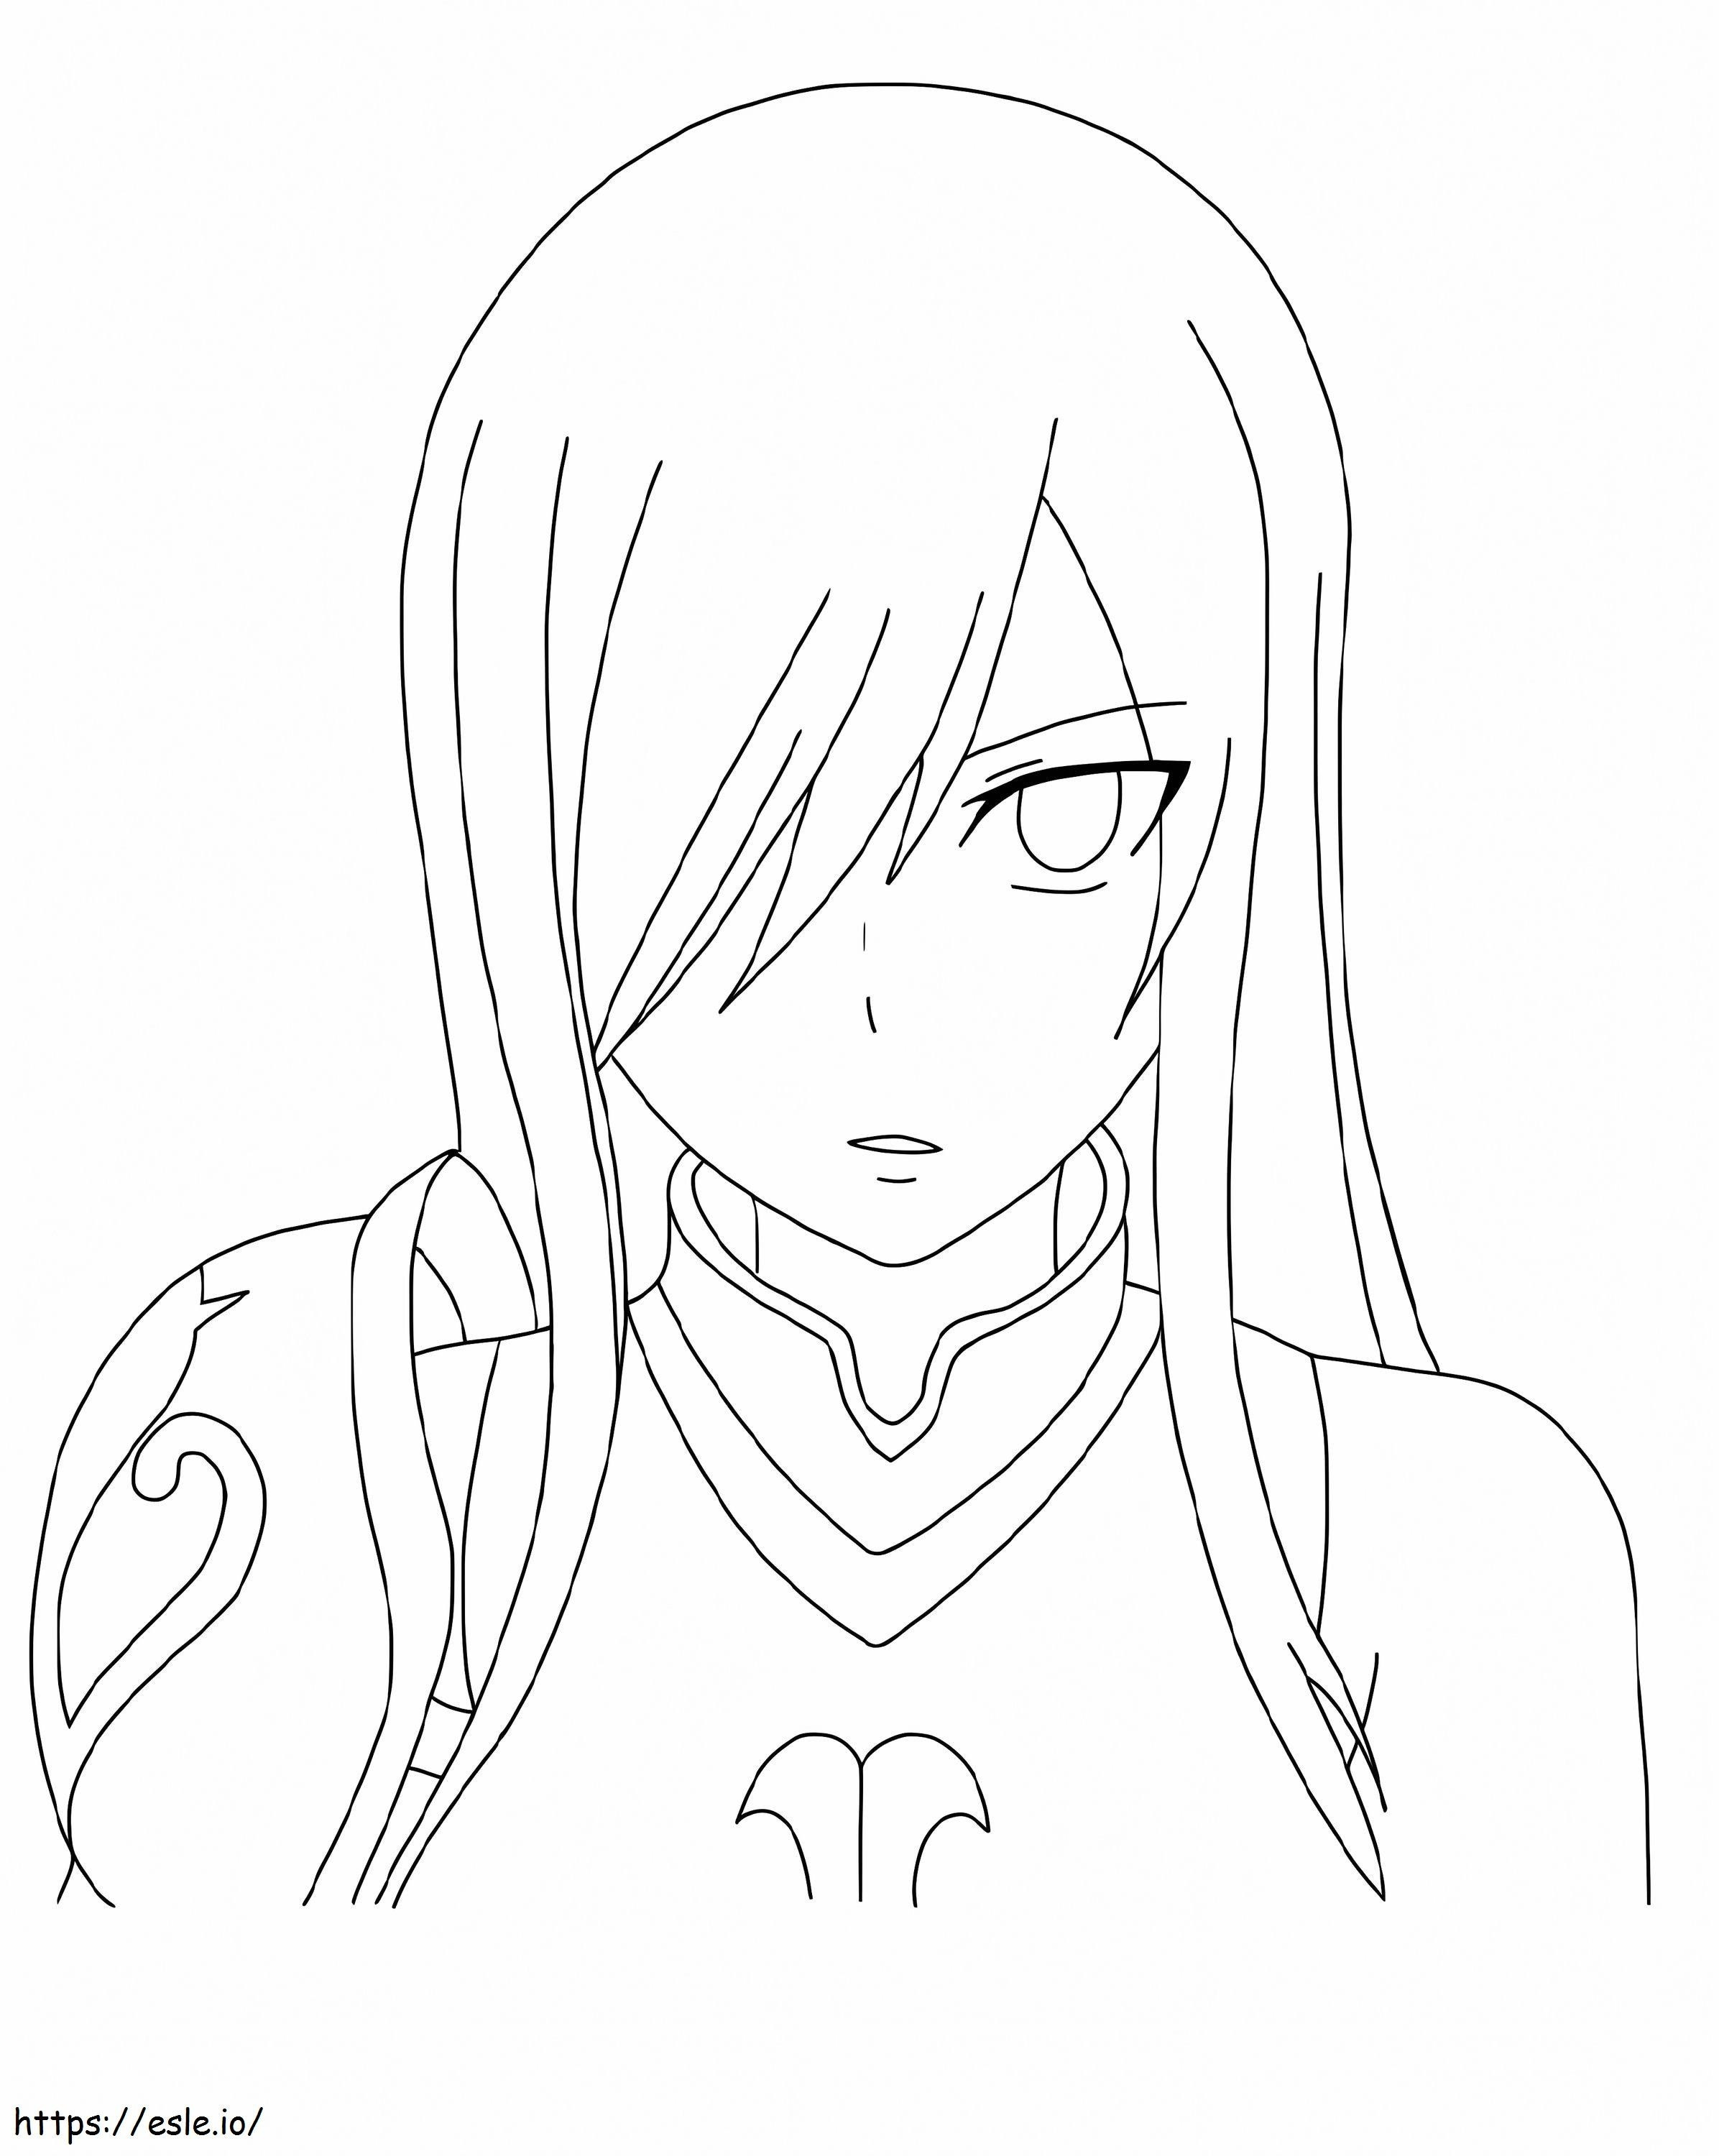 Erza Scarlett Fairy Tail coloring page